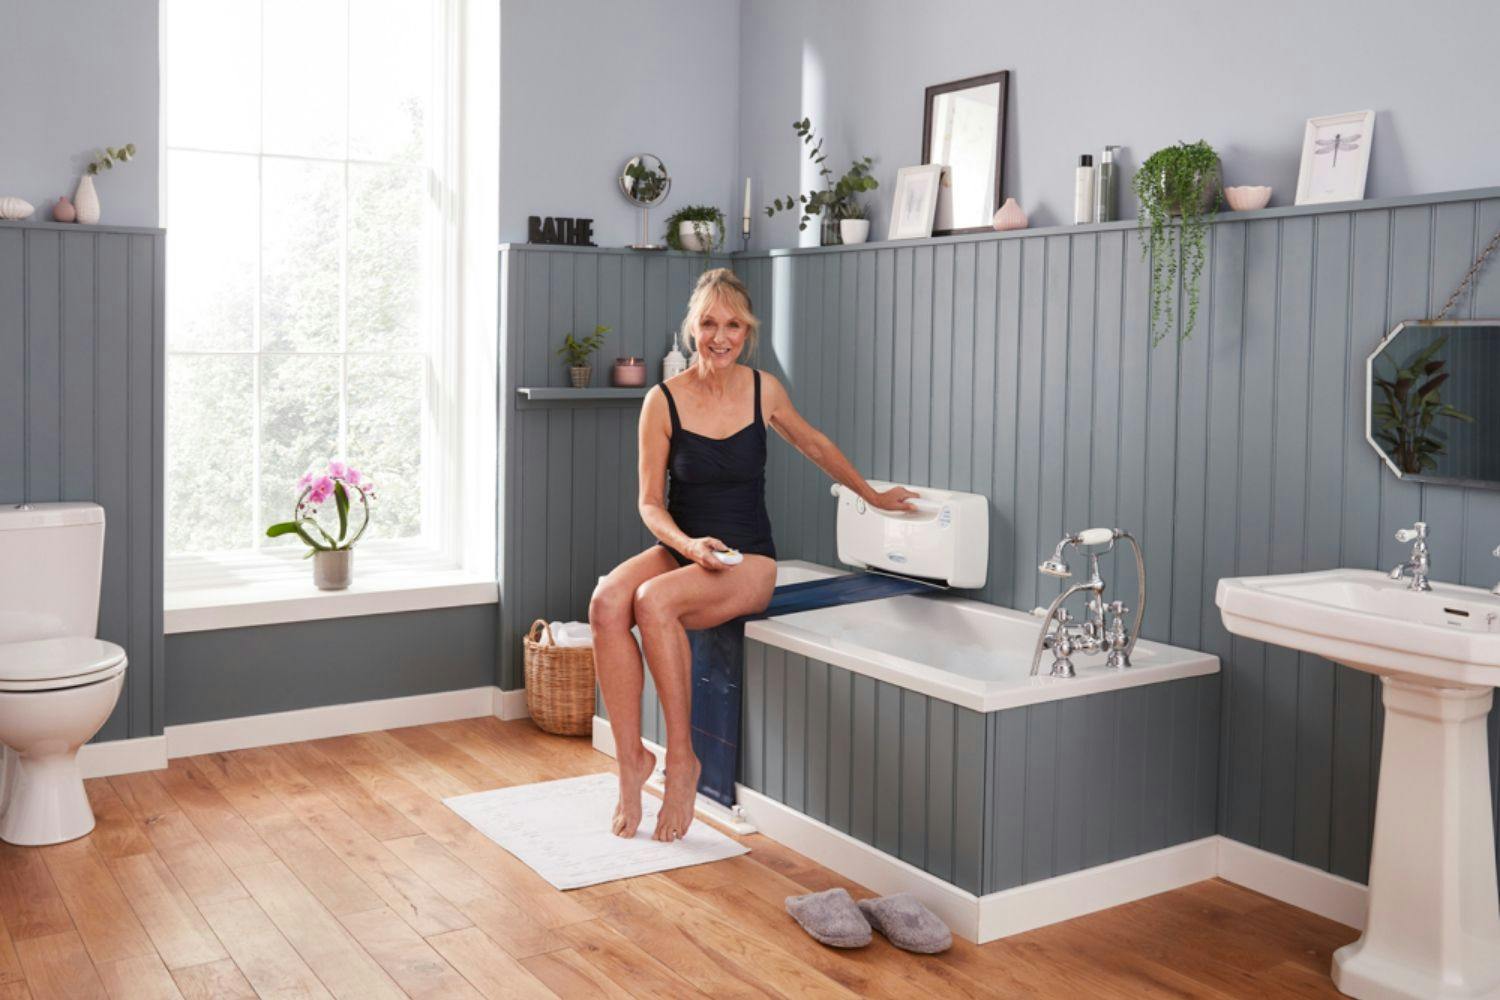 Image showing woman sitting on her bath lift.